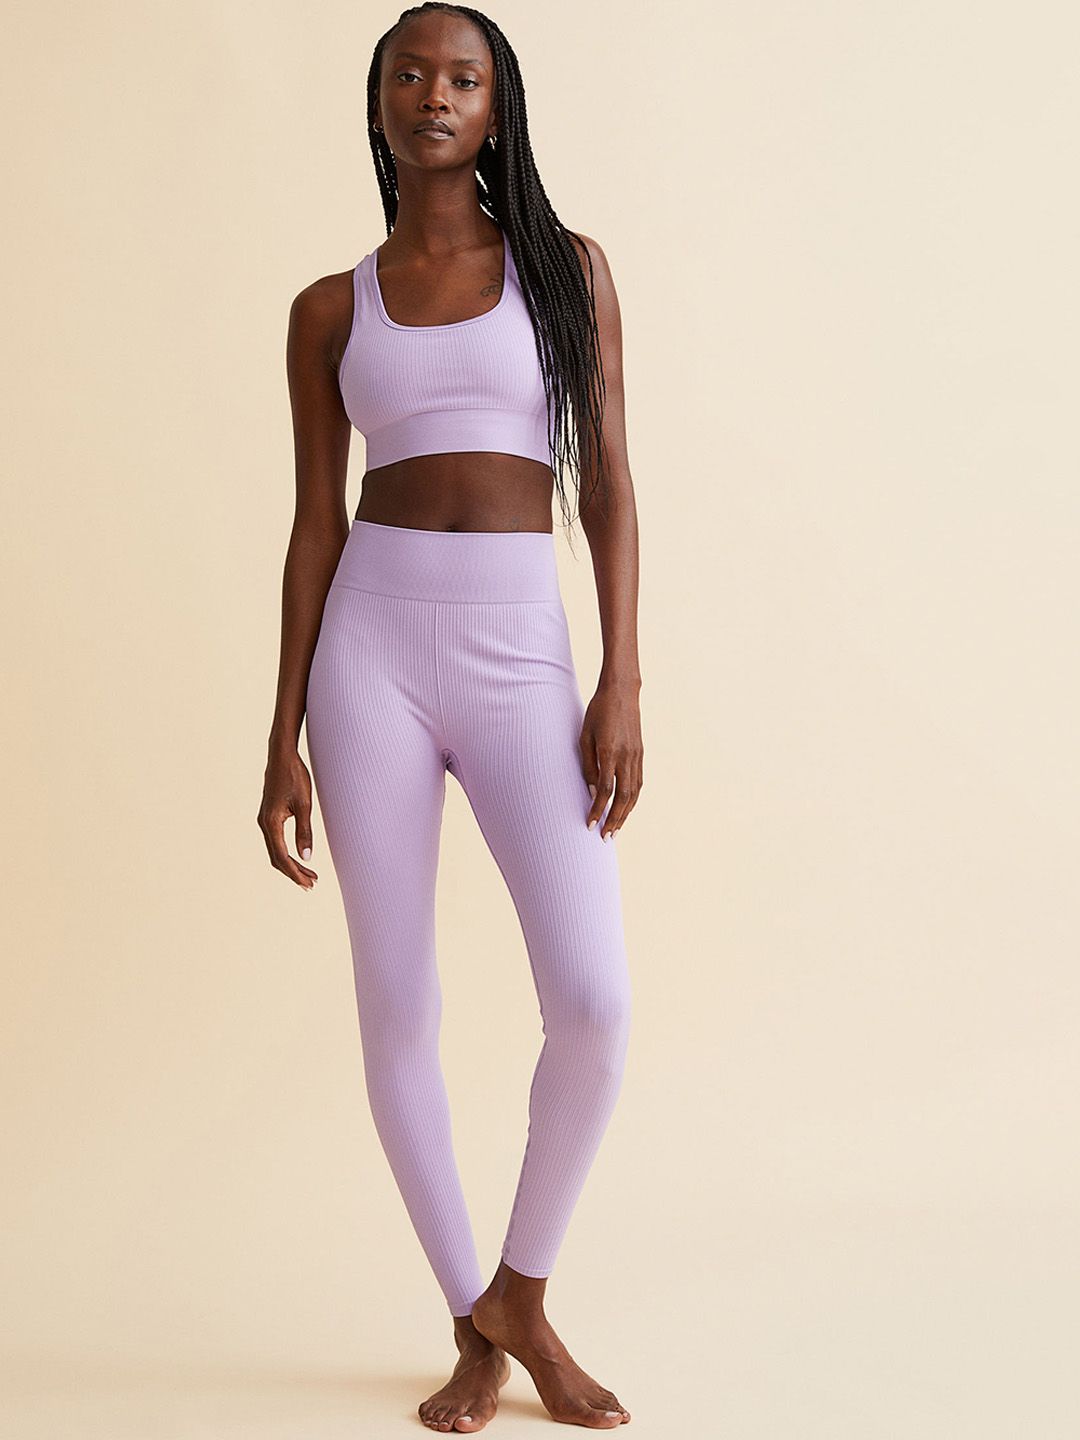 H&M Women Seamless Sports Tights Price in India